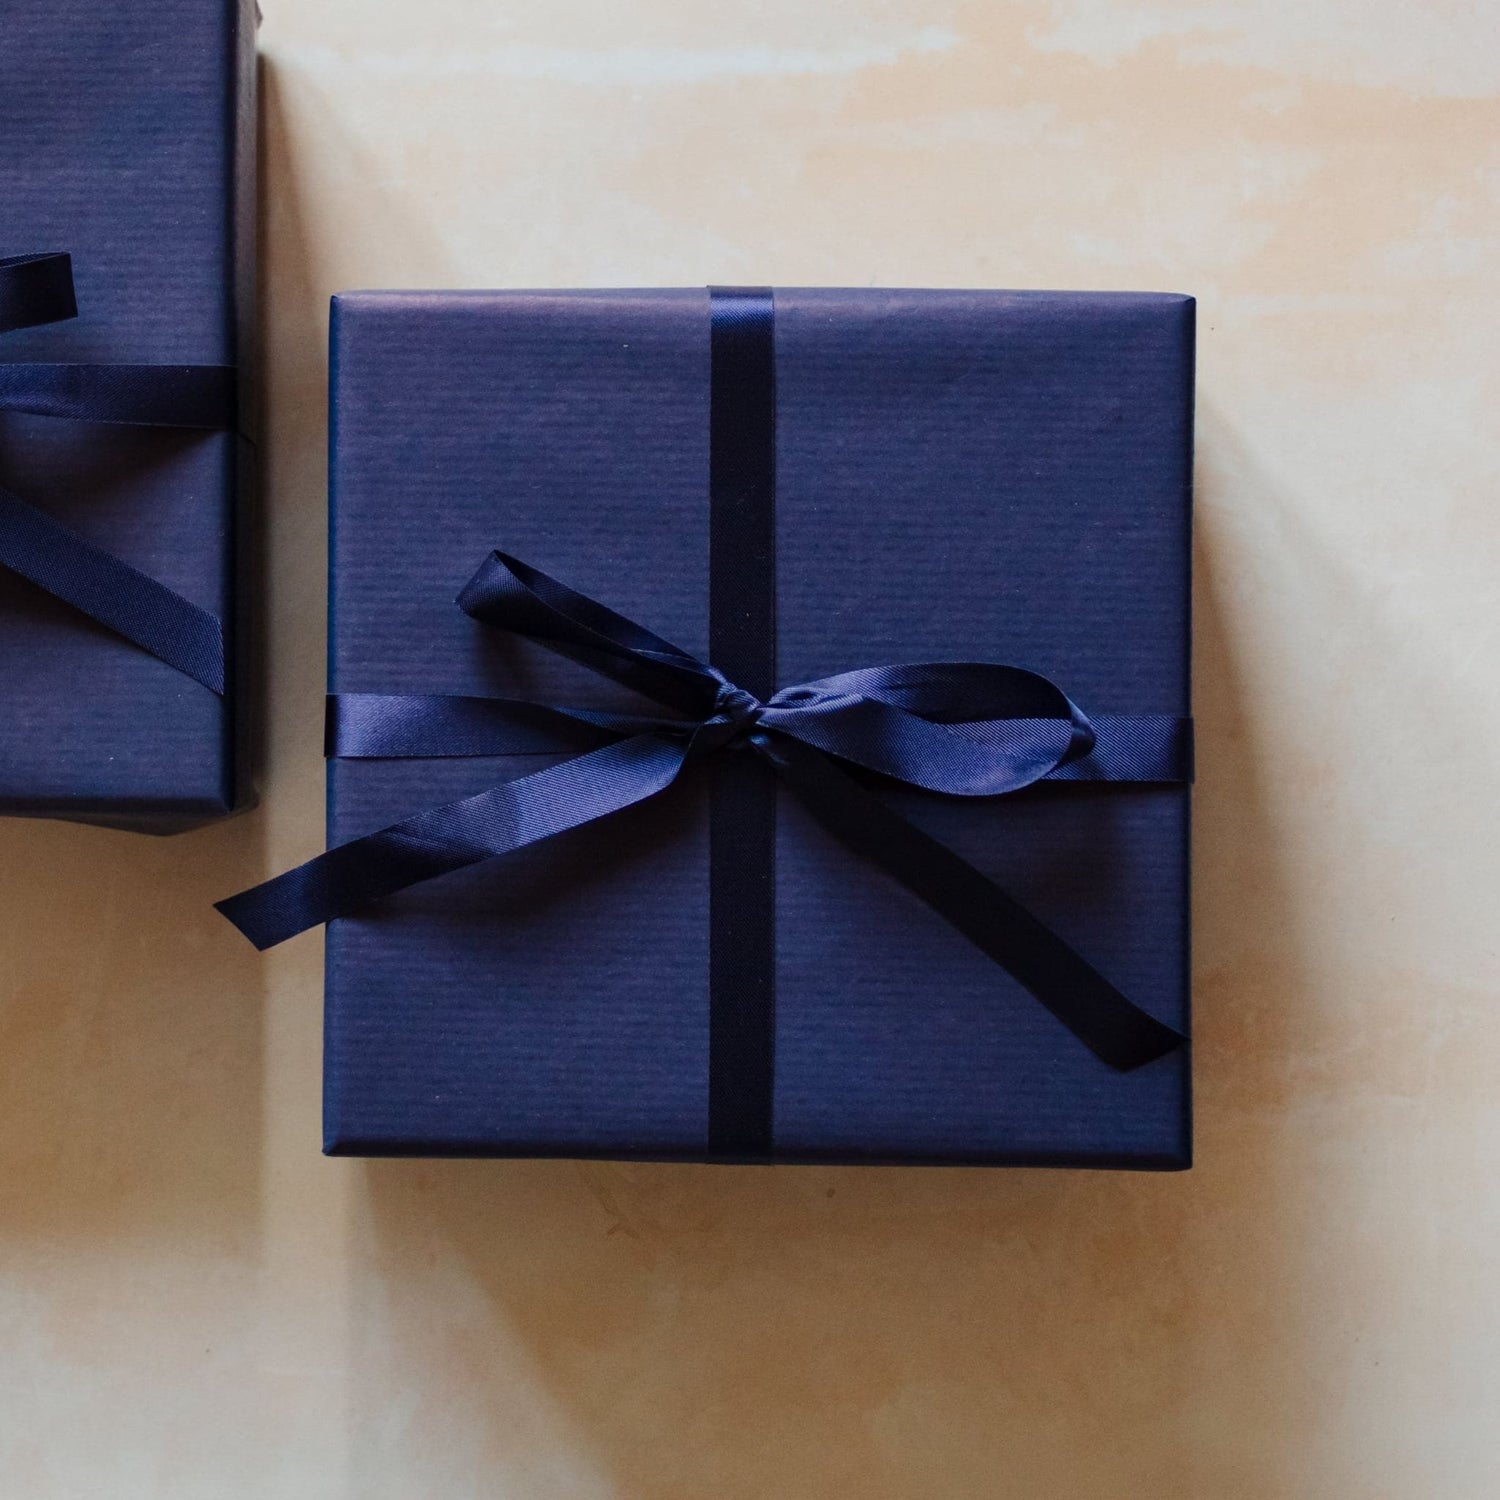 A honey scented 400g 3 wick soy candle from the Home County Co. is shown with luxury Gift Wrap. The 3 wick candle is wrapped in luxury navy wrapping paper secured with navy ribbon.